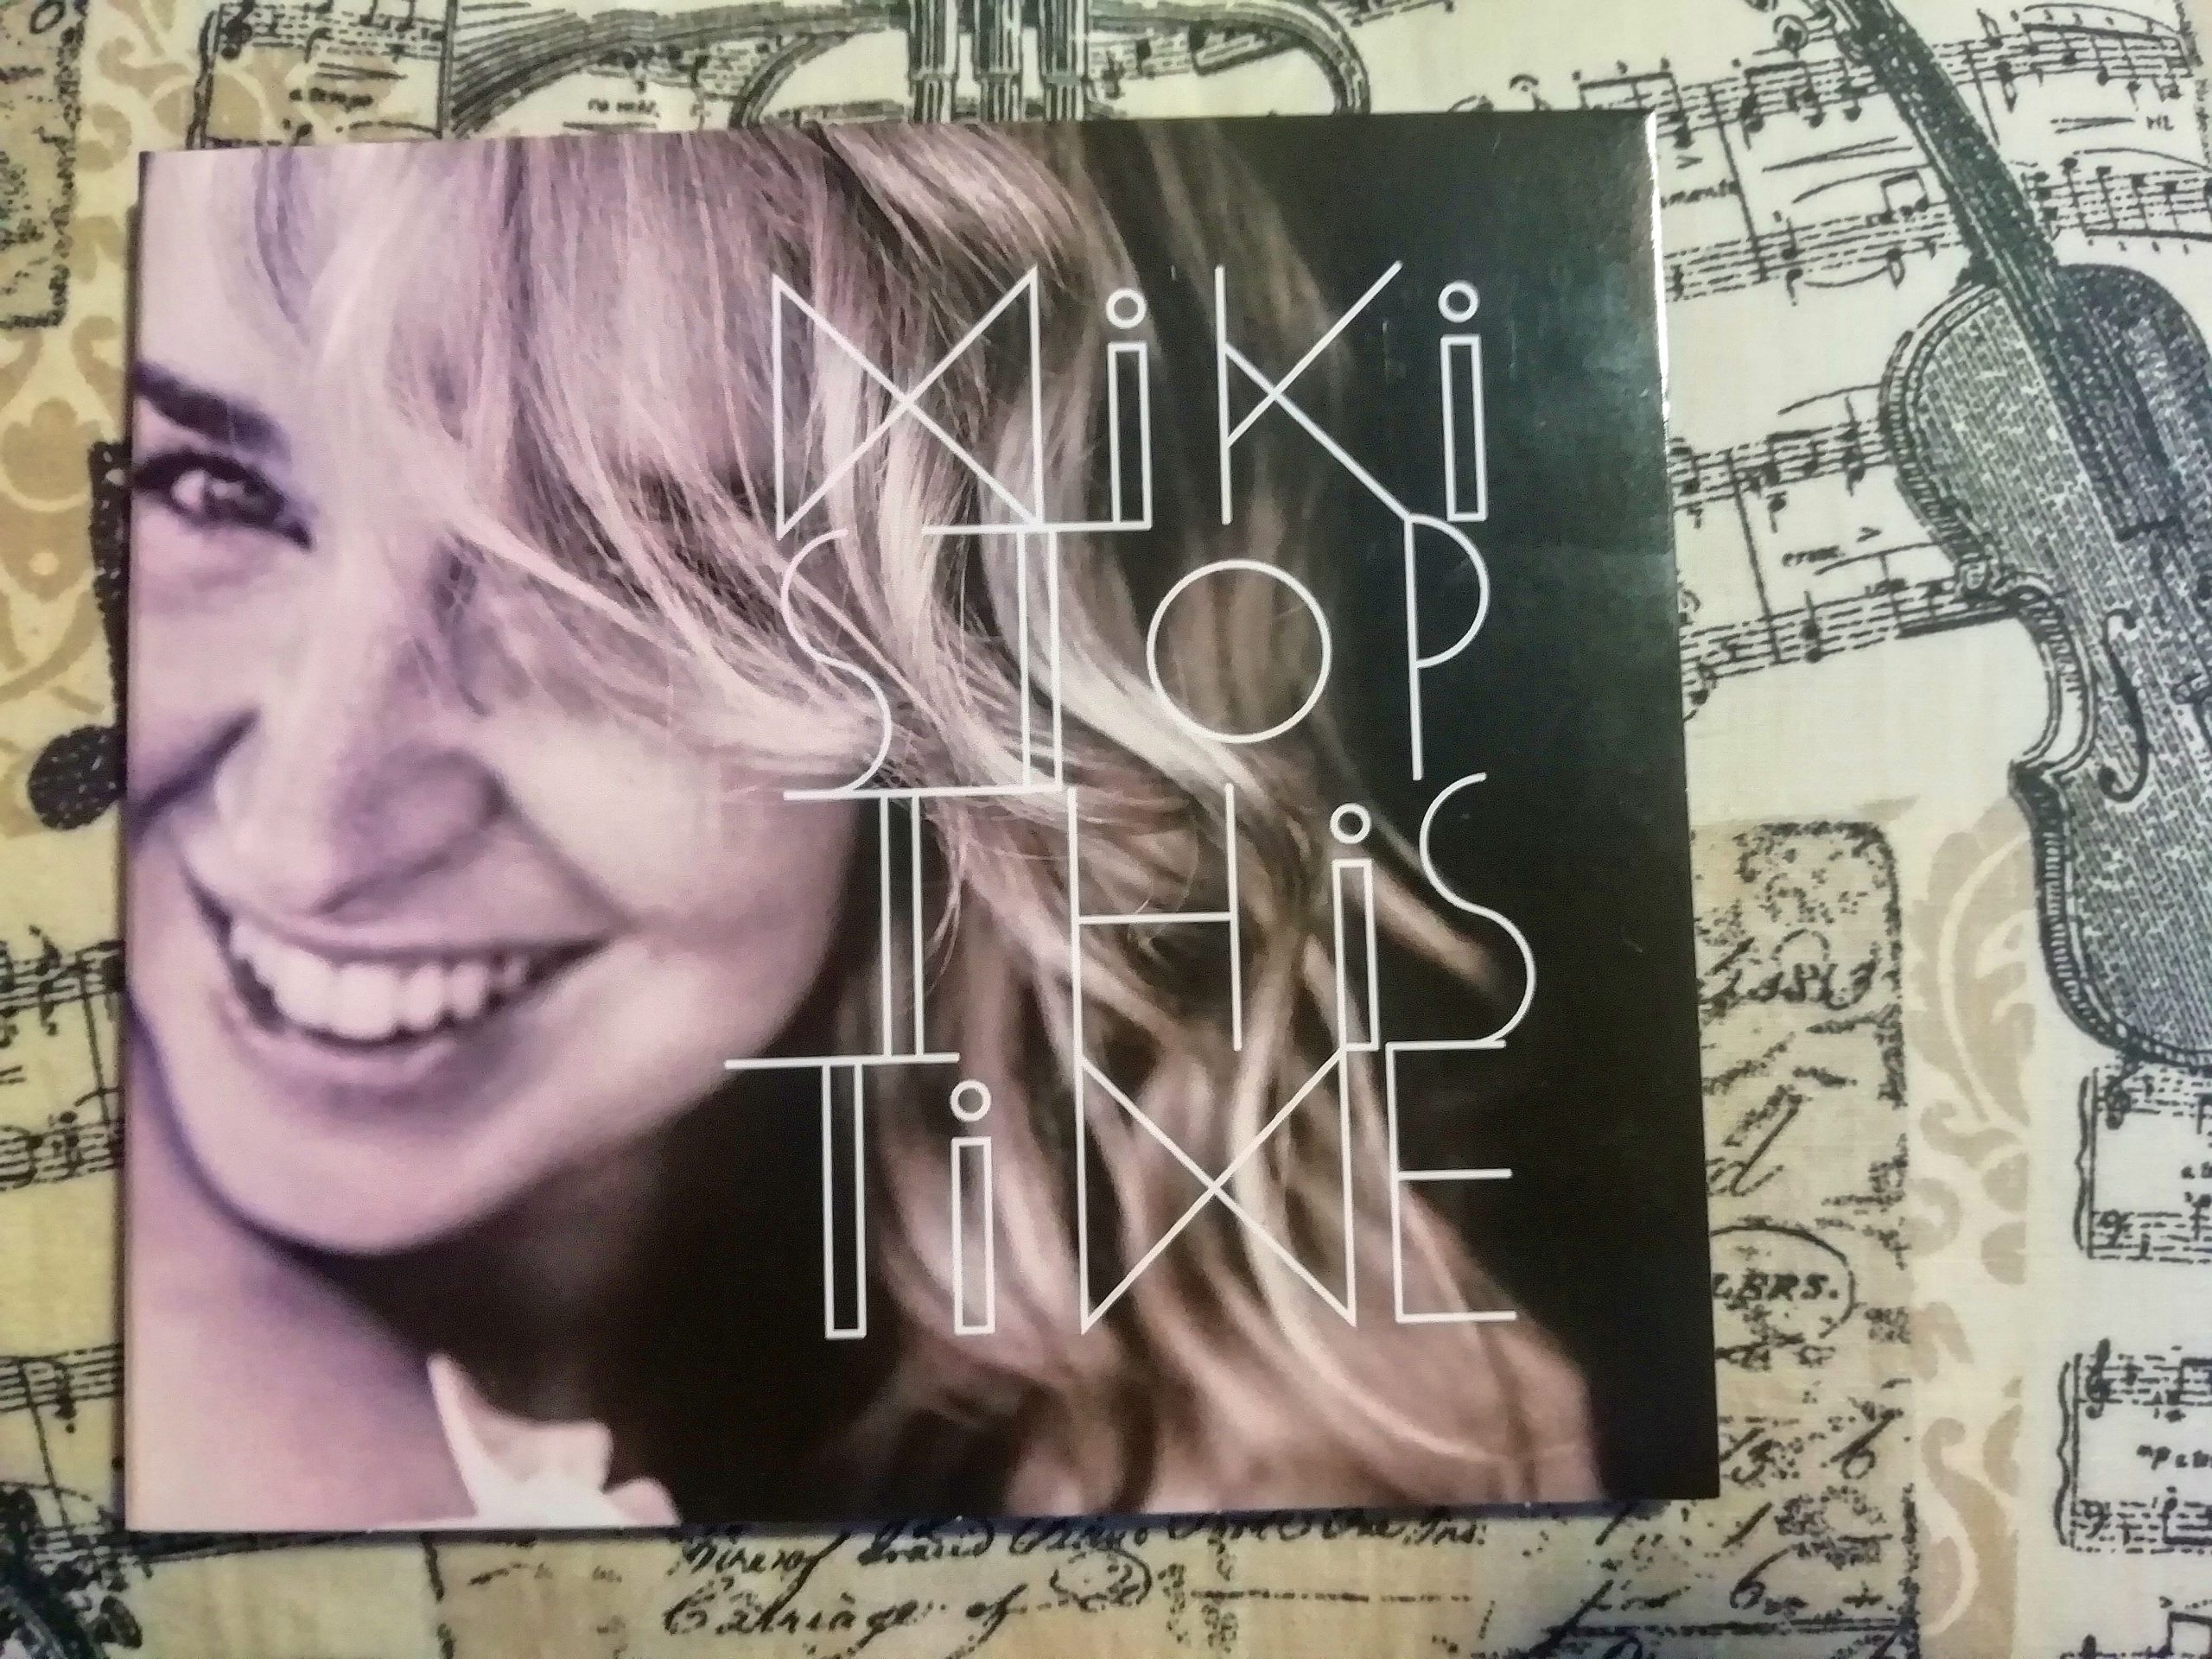 Miki – Stop This Time